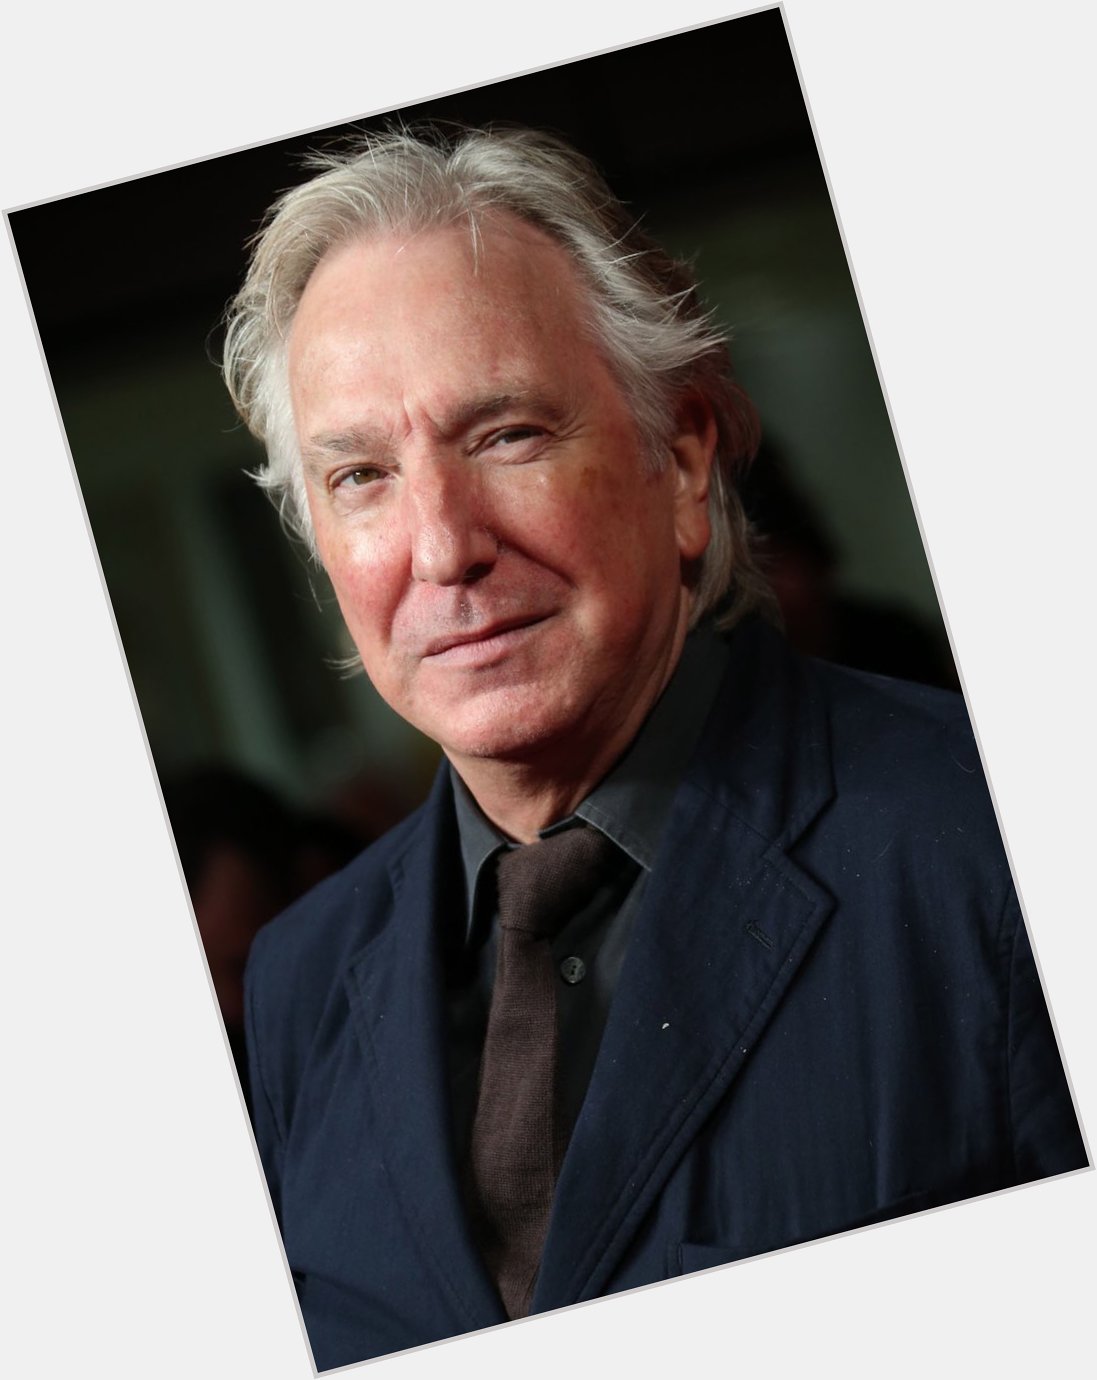 Happy Birthday to the late Alan Rickman who would\ve turned 76 today. 